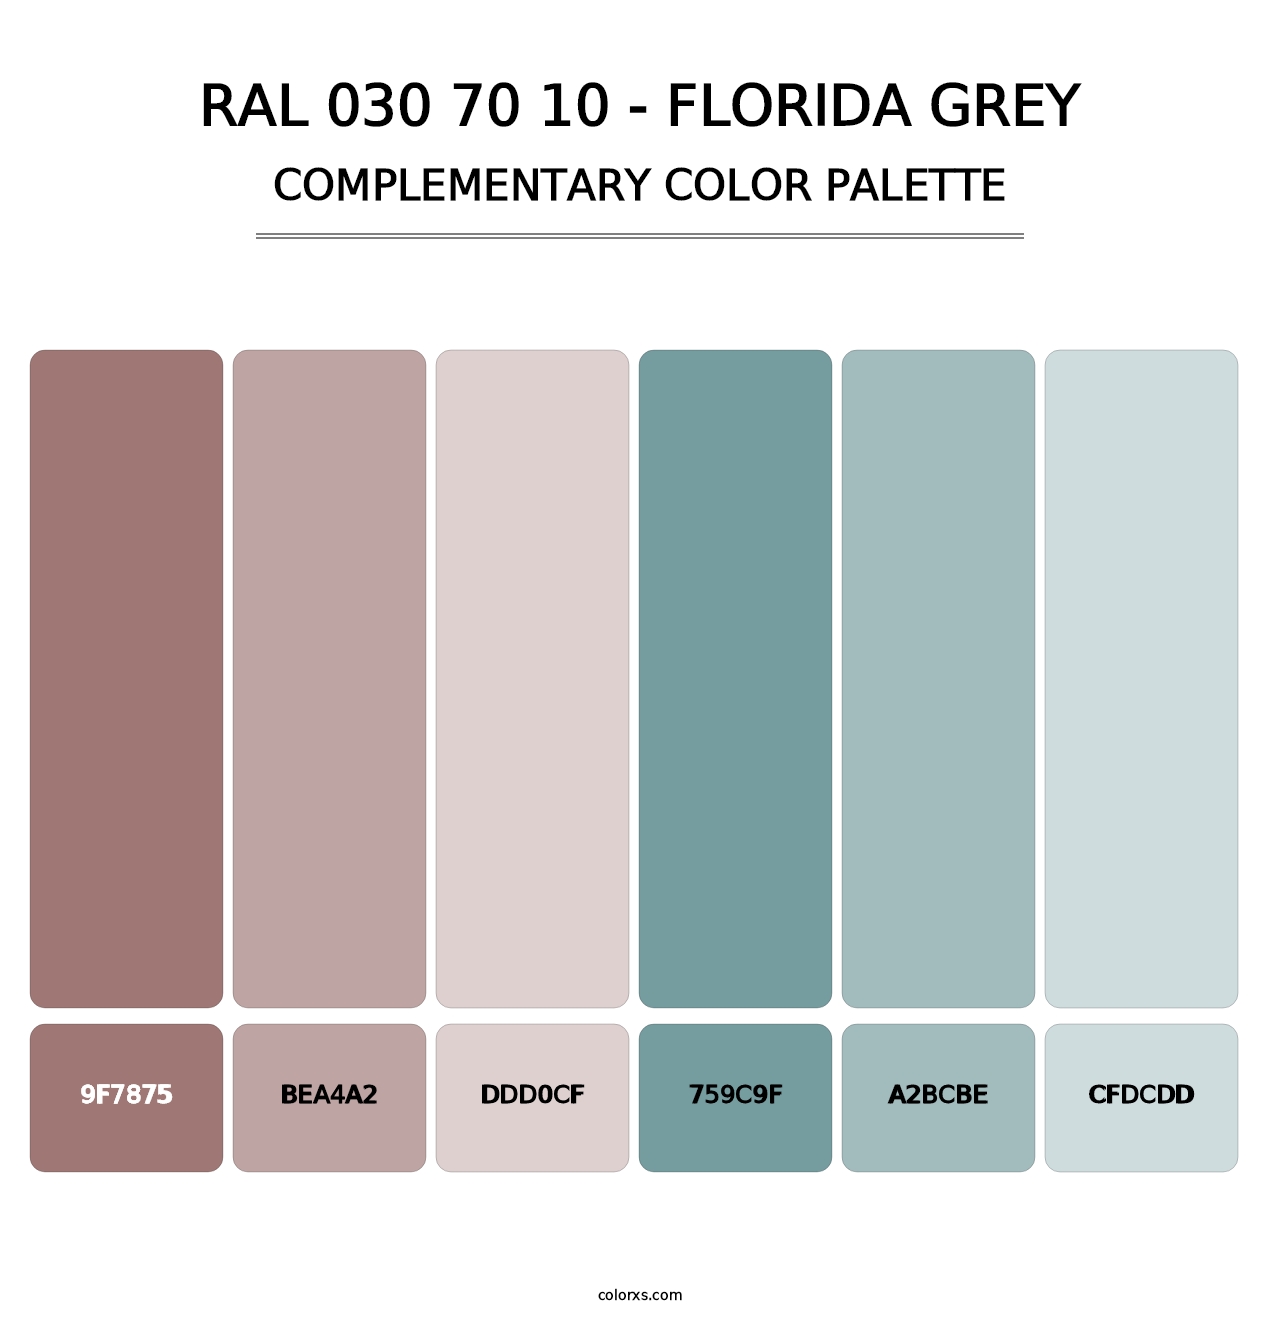 RAL 030 70 10 - Florida Grey - Complementary Color Palette